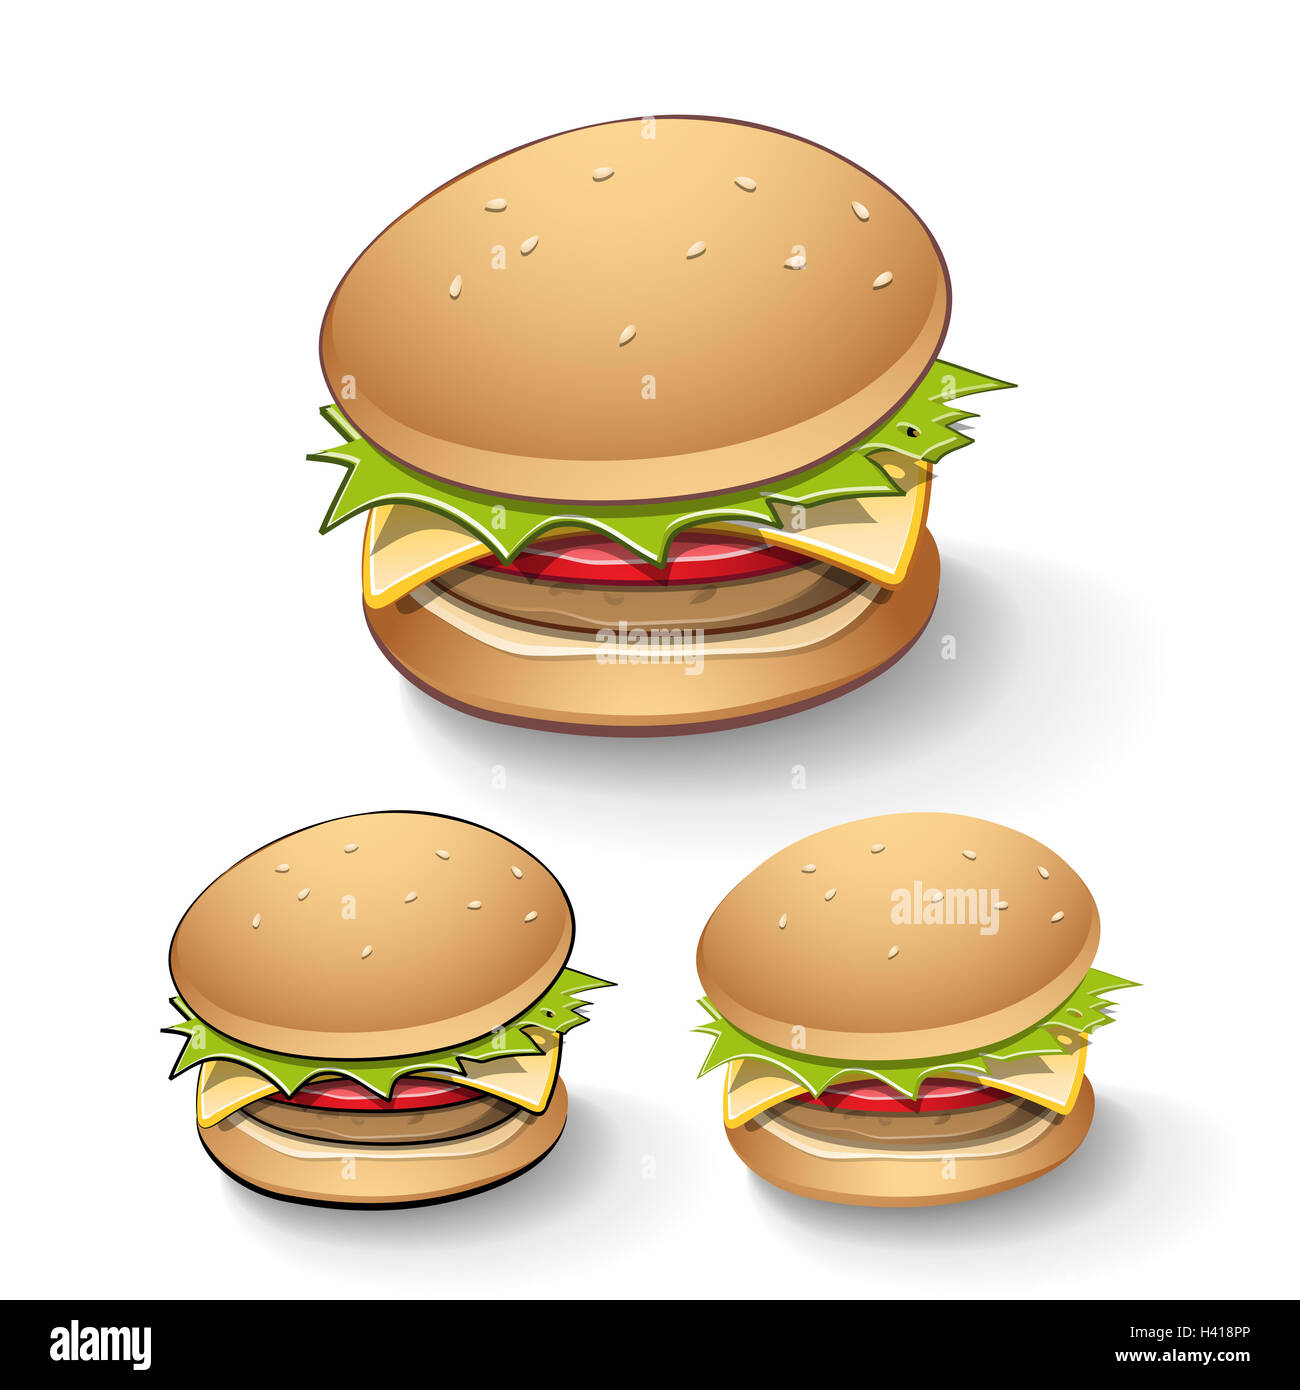 Vector Illustration of Tasty Cartoon Burgers isolated on a White Background with Transparent Shadow Stock Photo